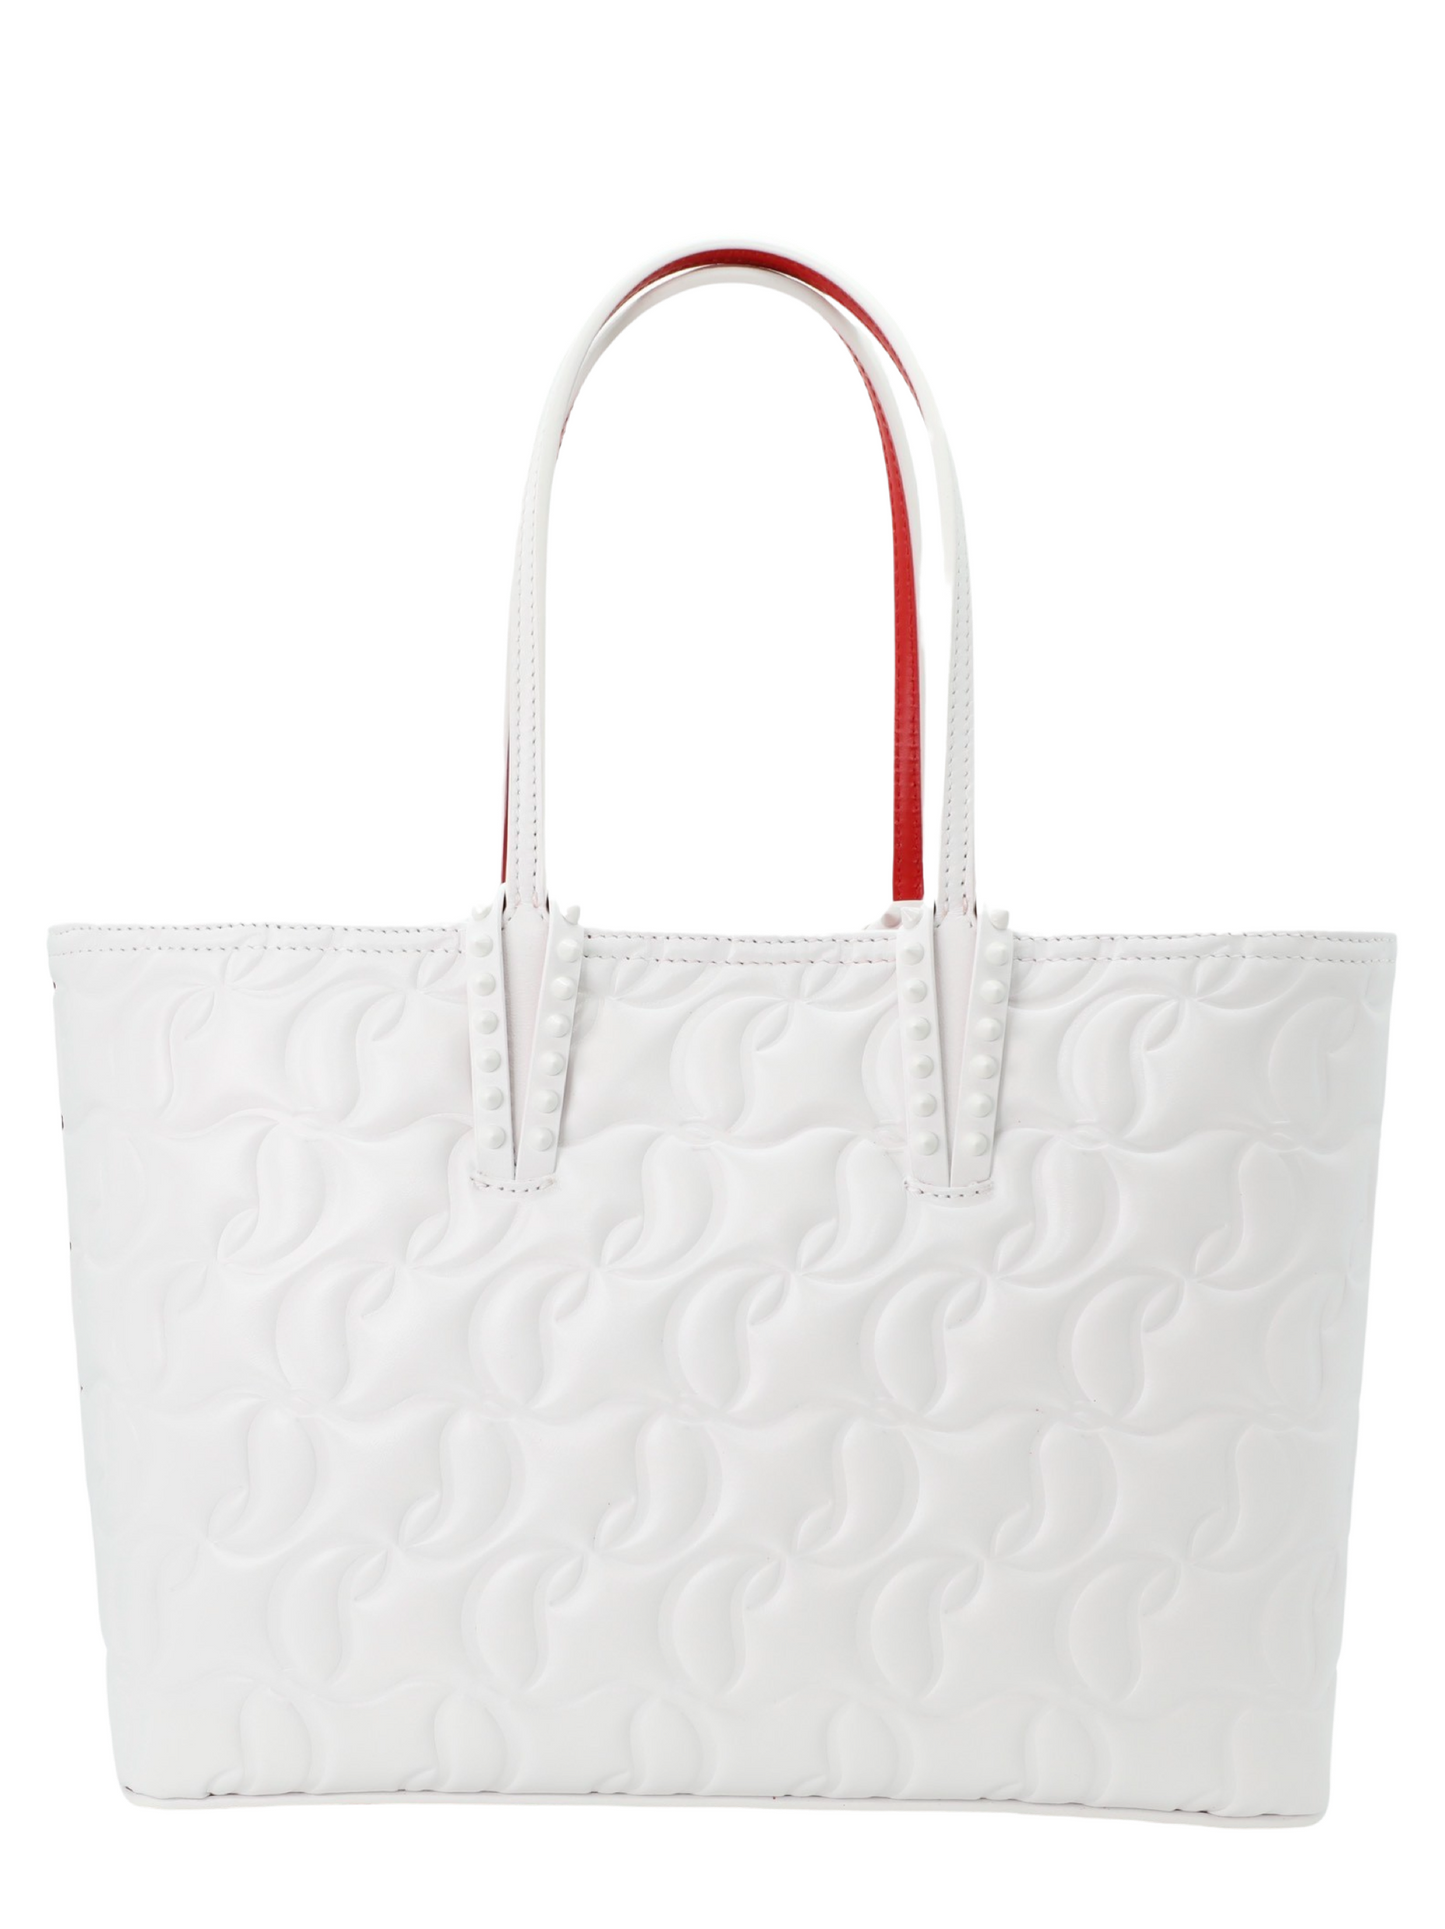 Christian Louboutin Cabata Small Nappa Tote Bag (More Colors) | In-Store Only